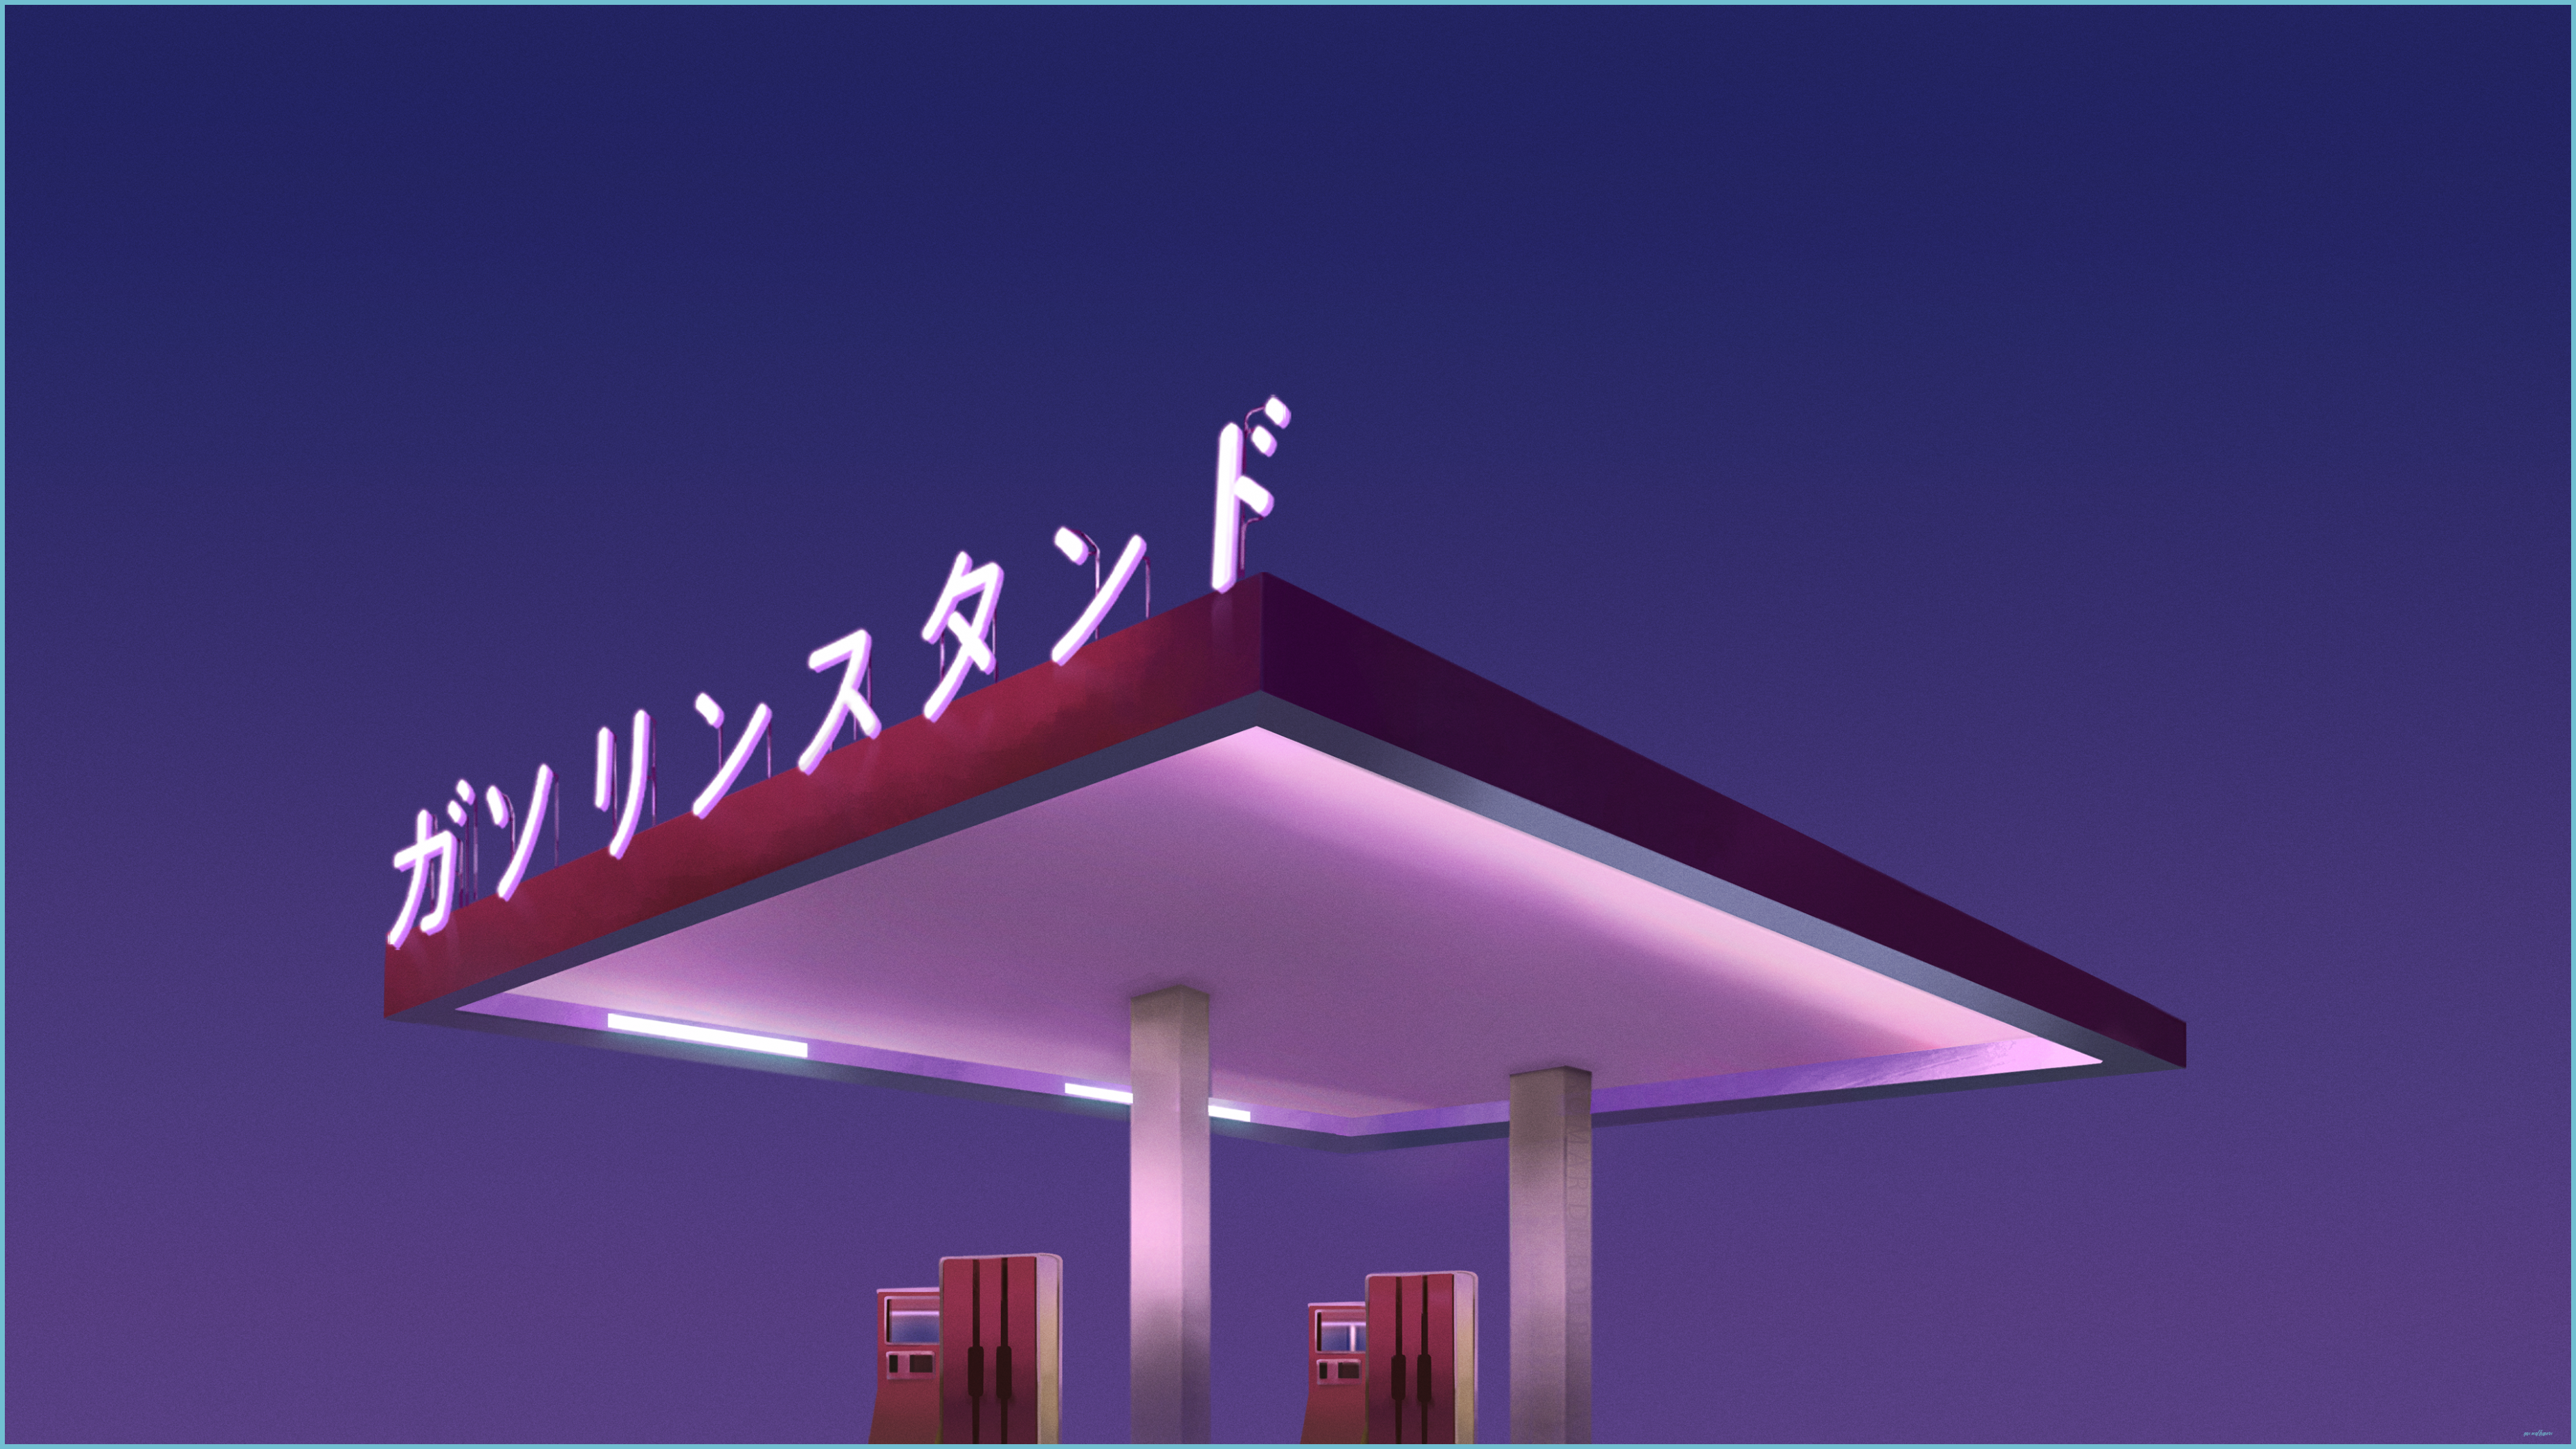 Neon Gas Station Wallpaper Free Neon Gas Station Background